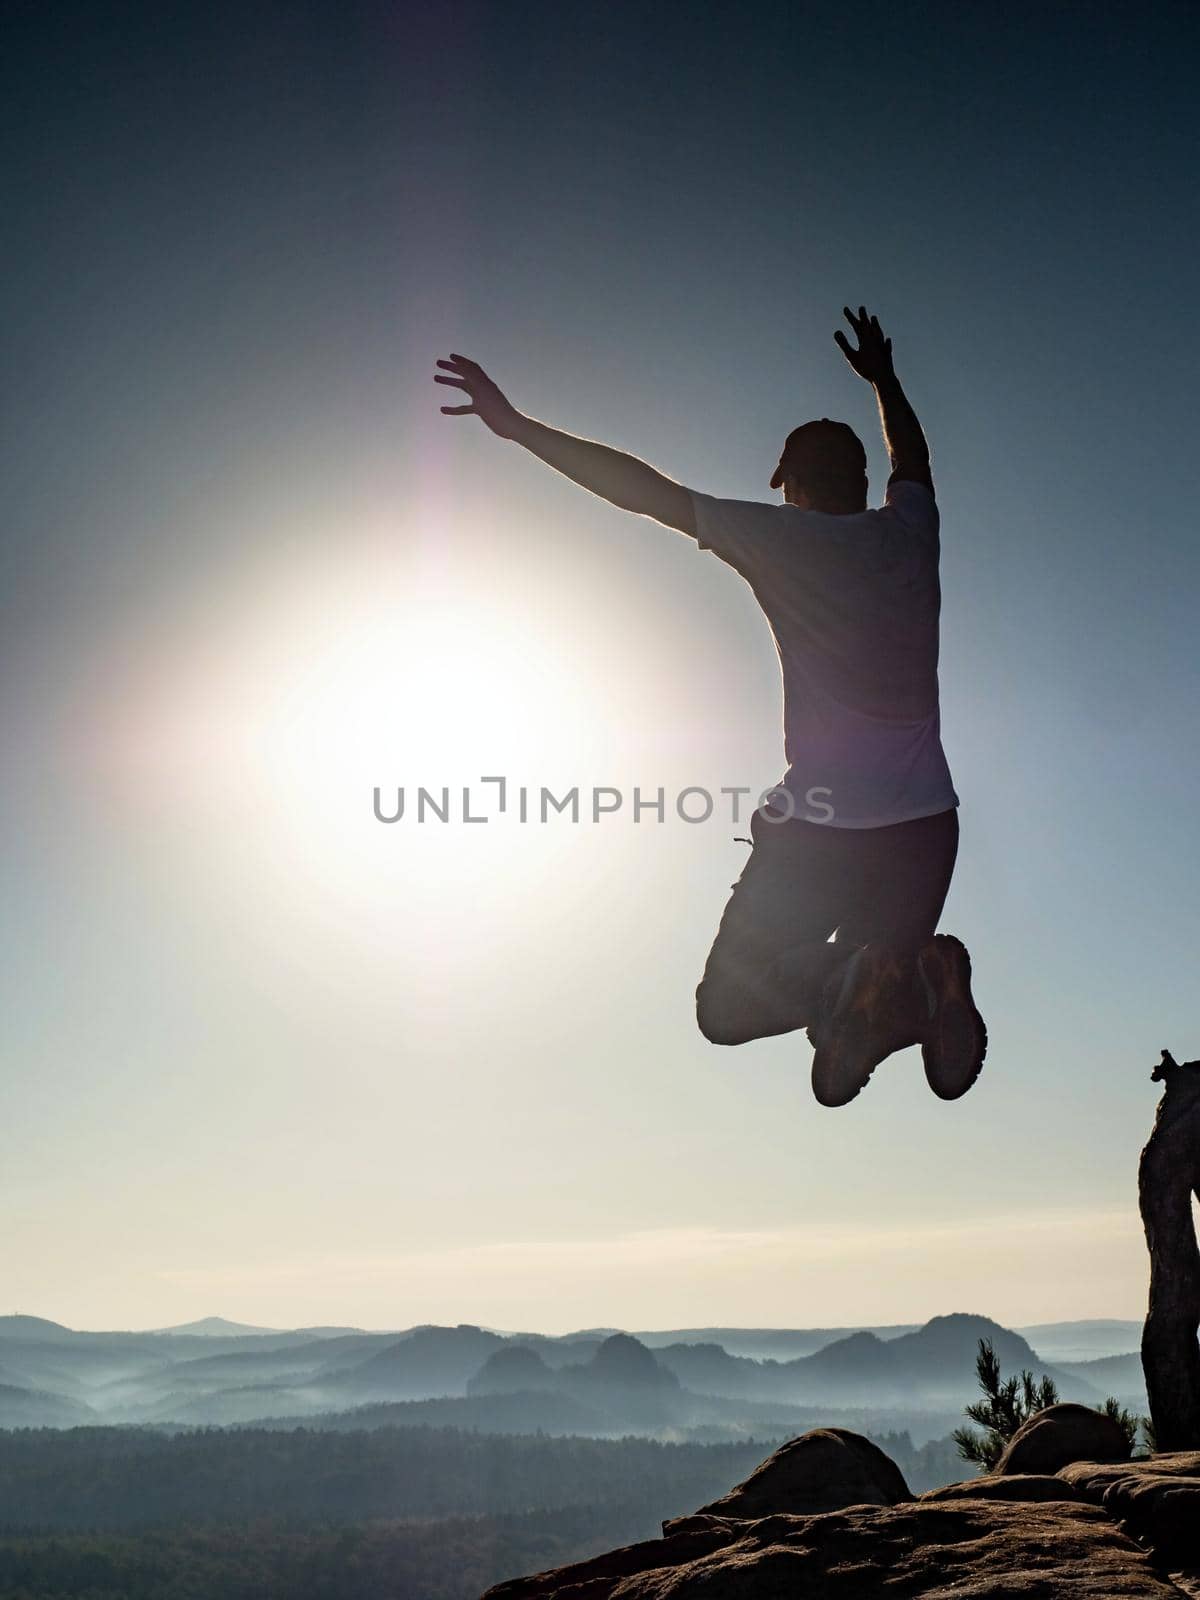 Success and freedom. The independence concept photo. Hiker jumps at the top of the mountains, with arms raised against sunrise.